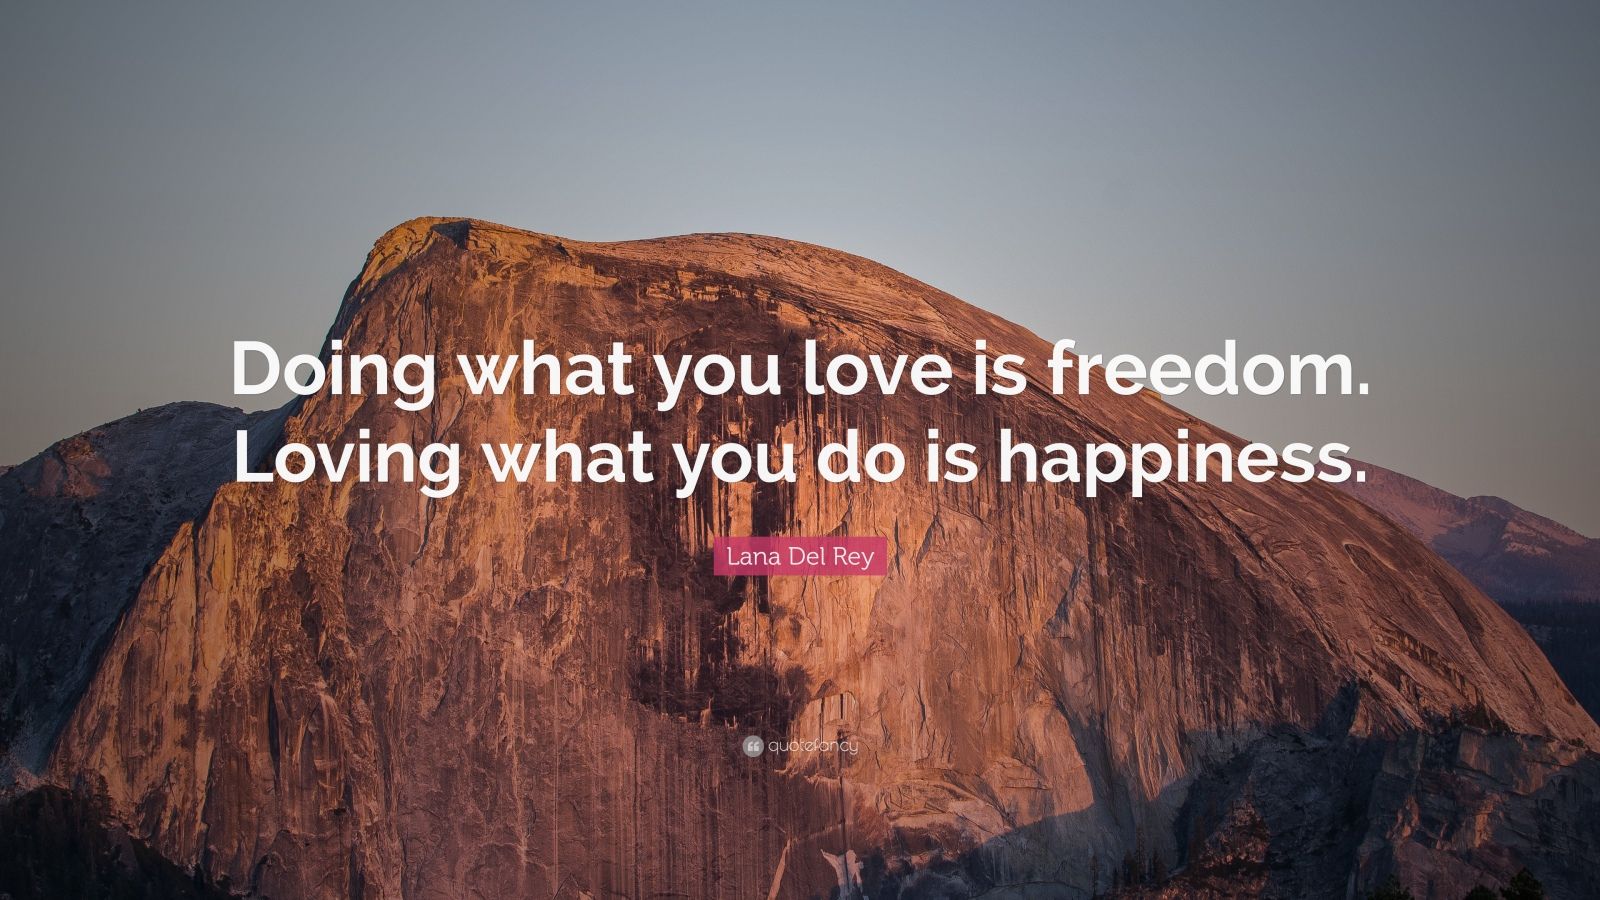 Lana Del Rey Quote: “Doing what you love is freedom. Loving what you do